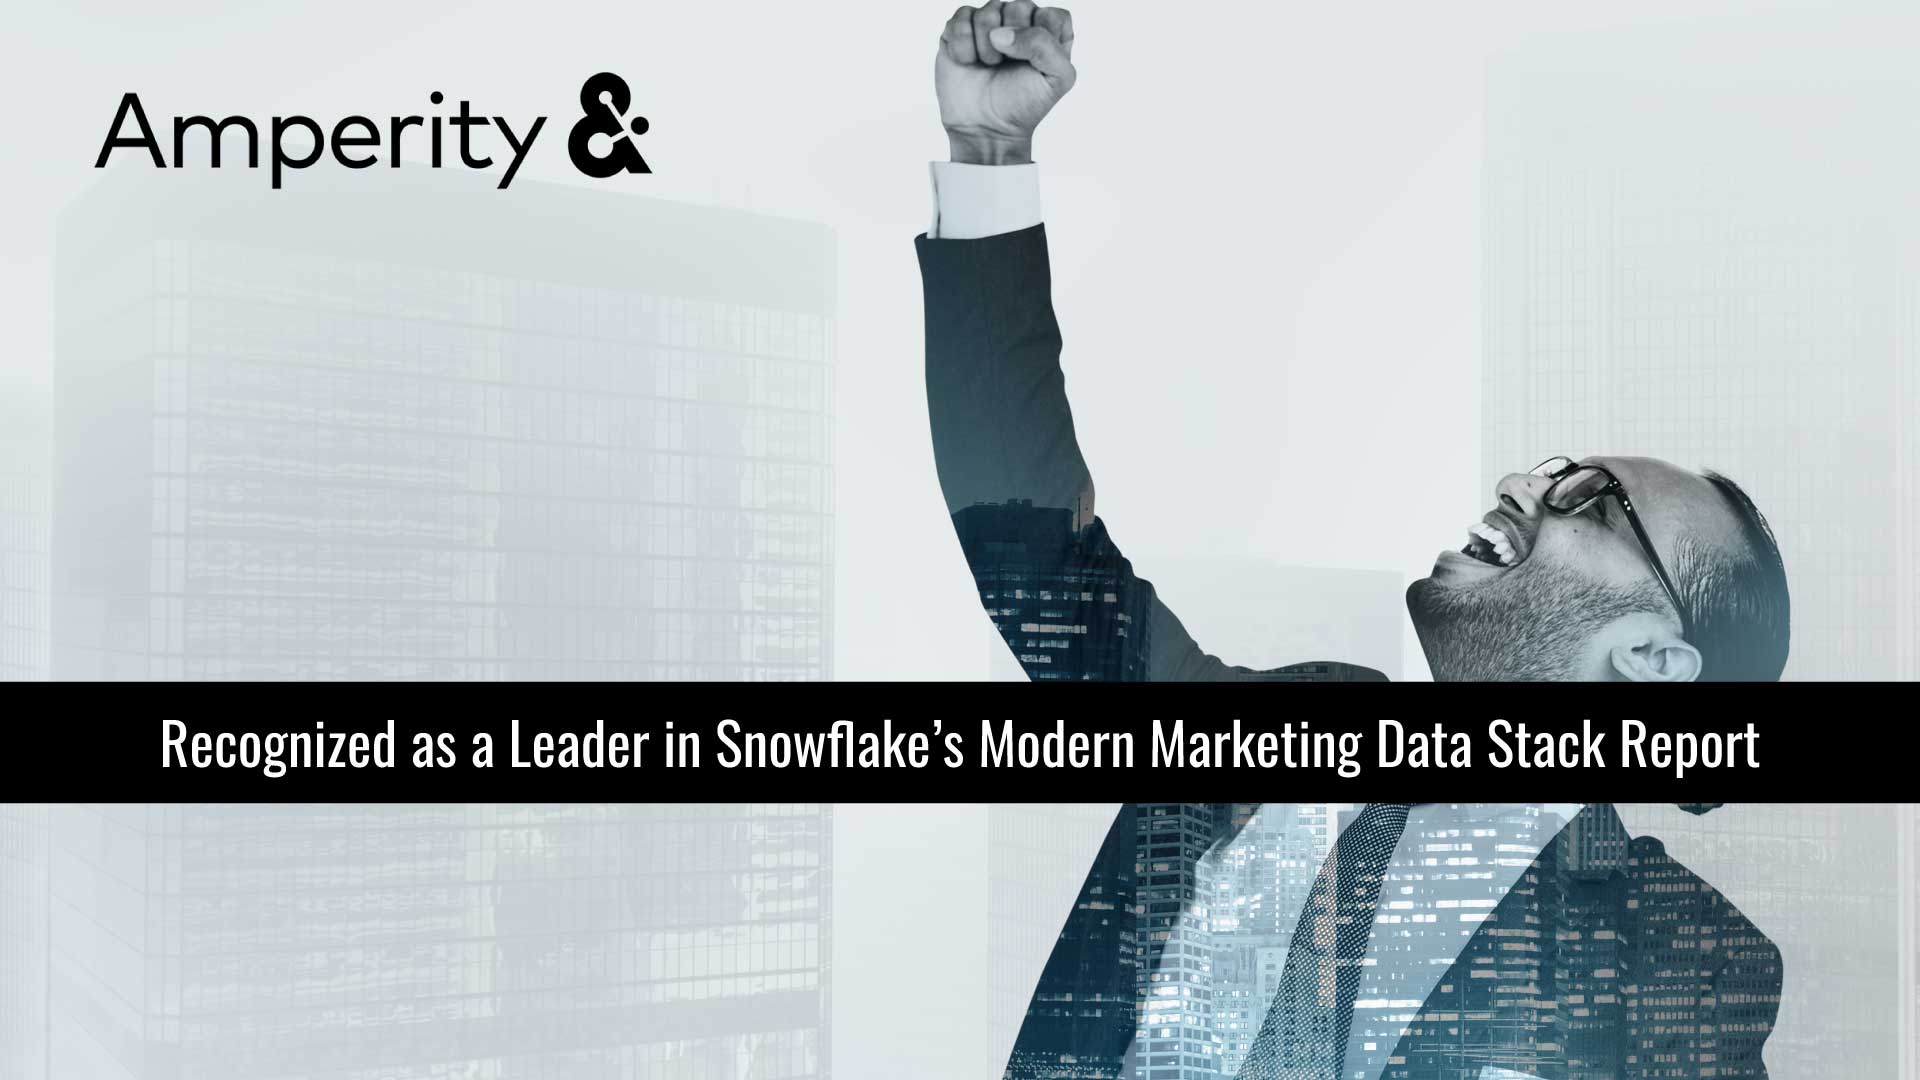 Amperity Recognized as a Leader in Snowflake’s Modern Marketing Data Stack Report